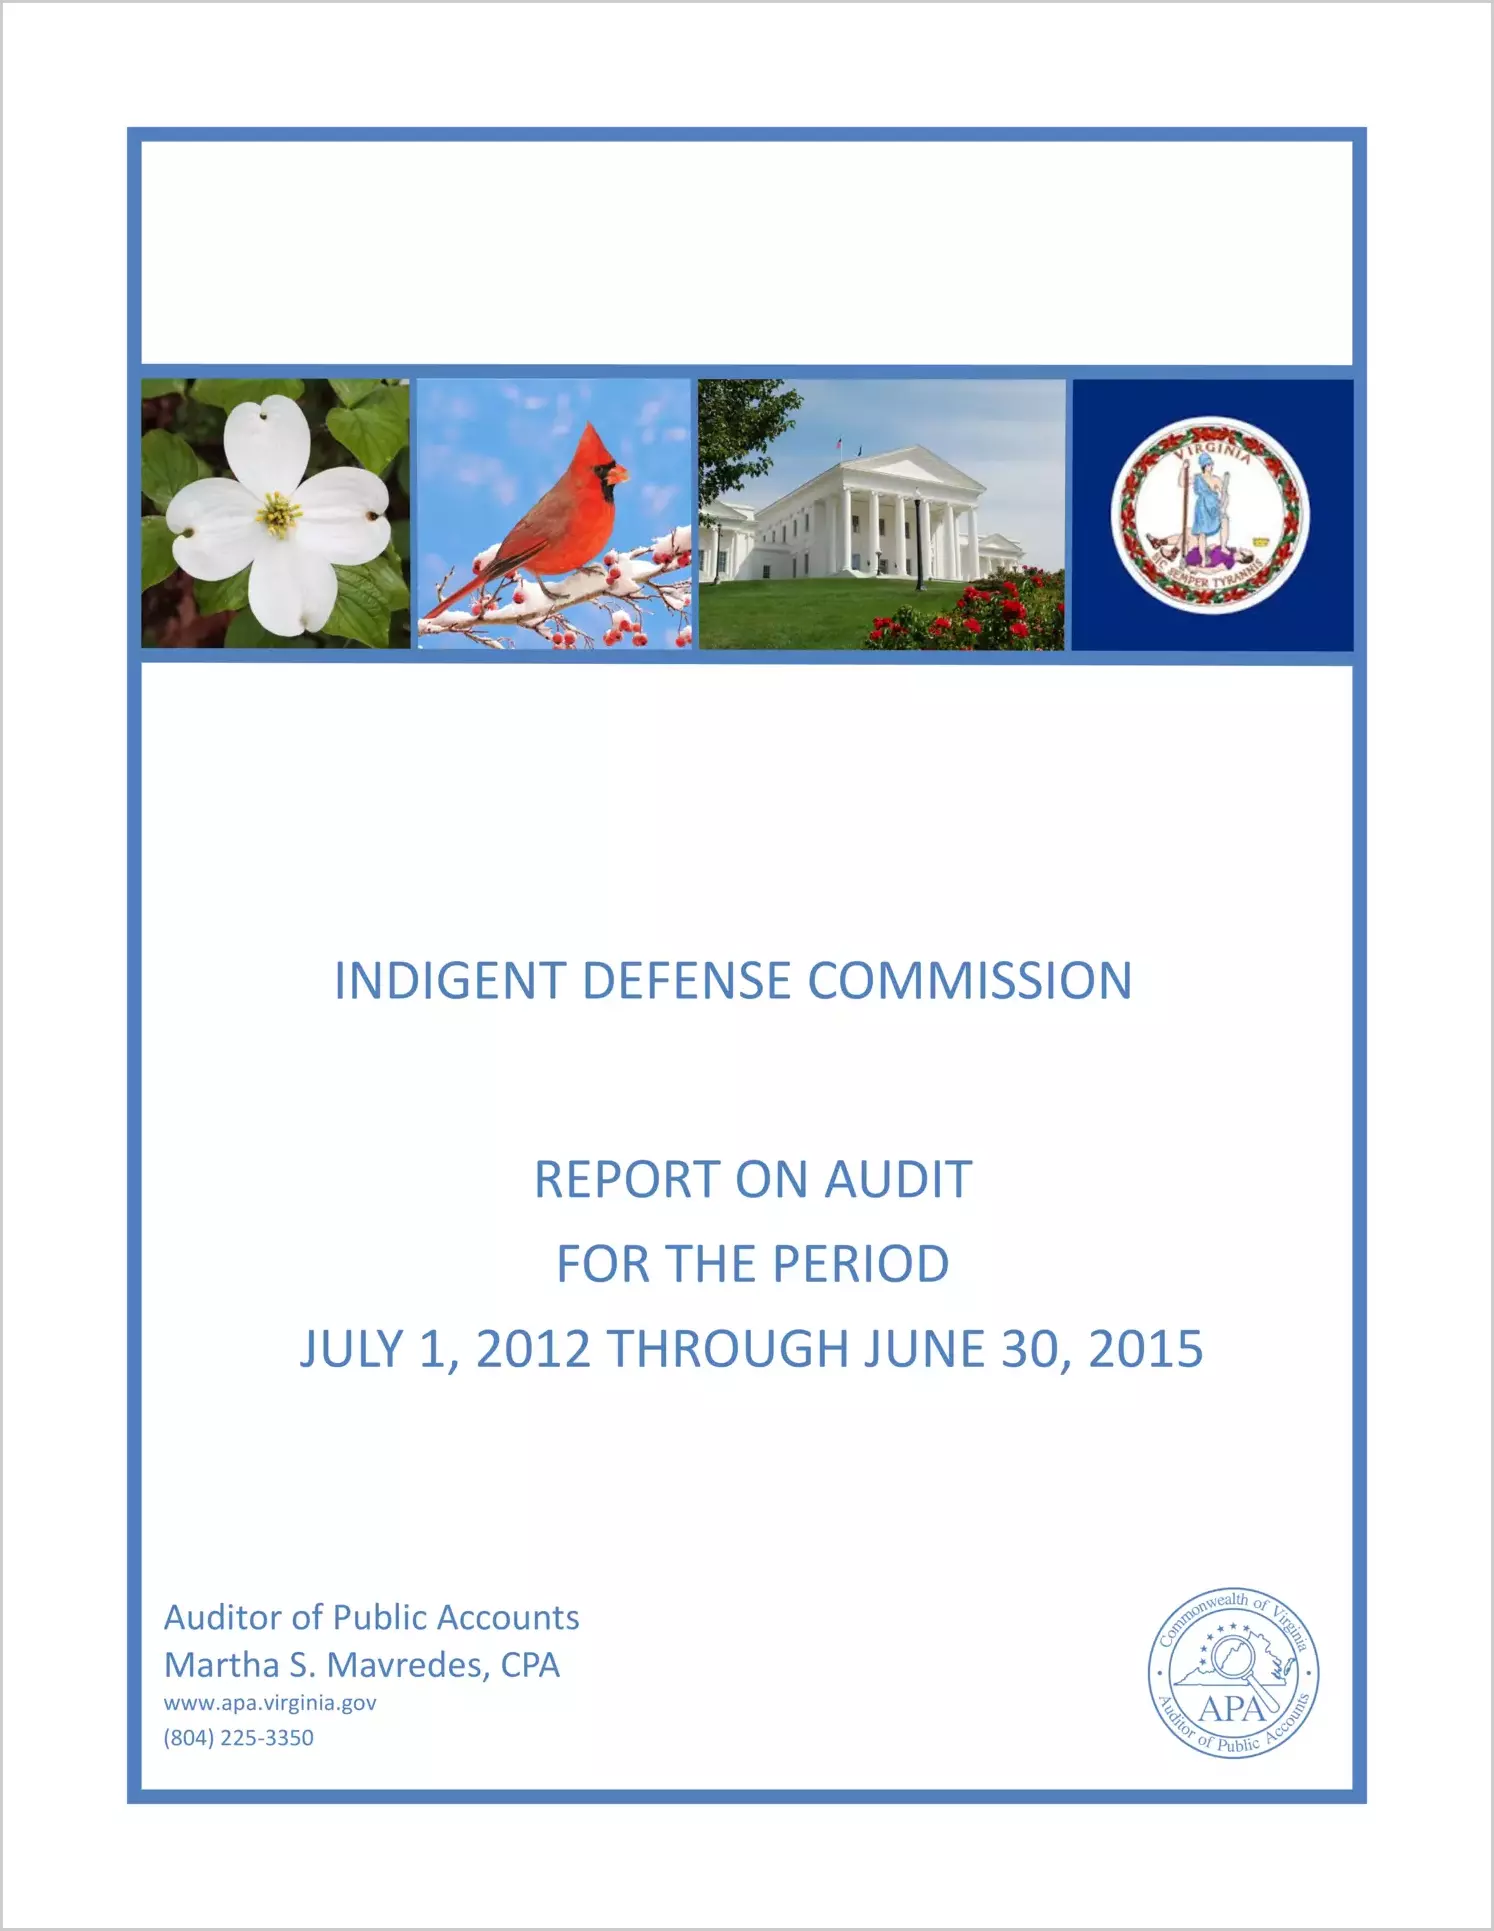 Indigent Defense Commission report on audit for the period July 1, 2012 through June 30, 2015